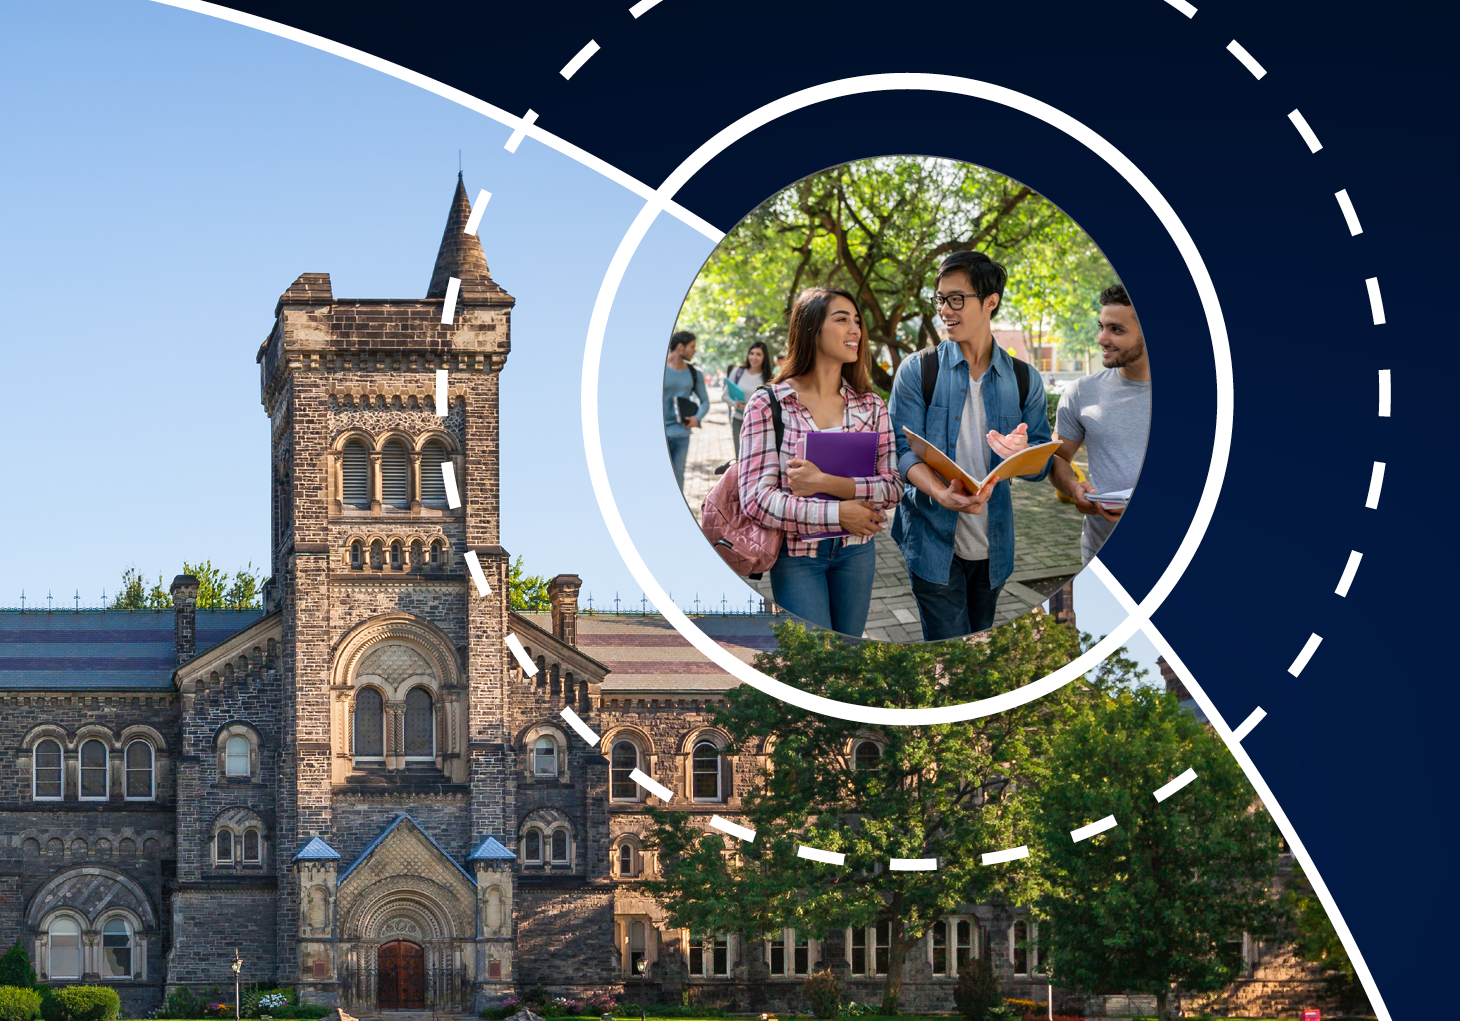 students walking on campus and image of University College, U of T